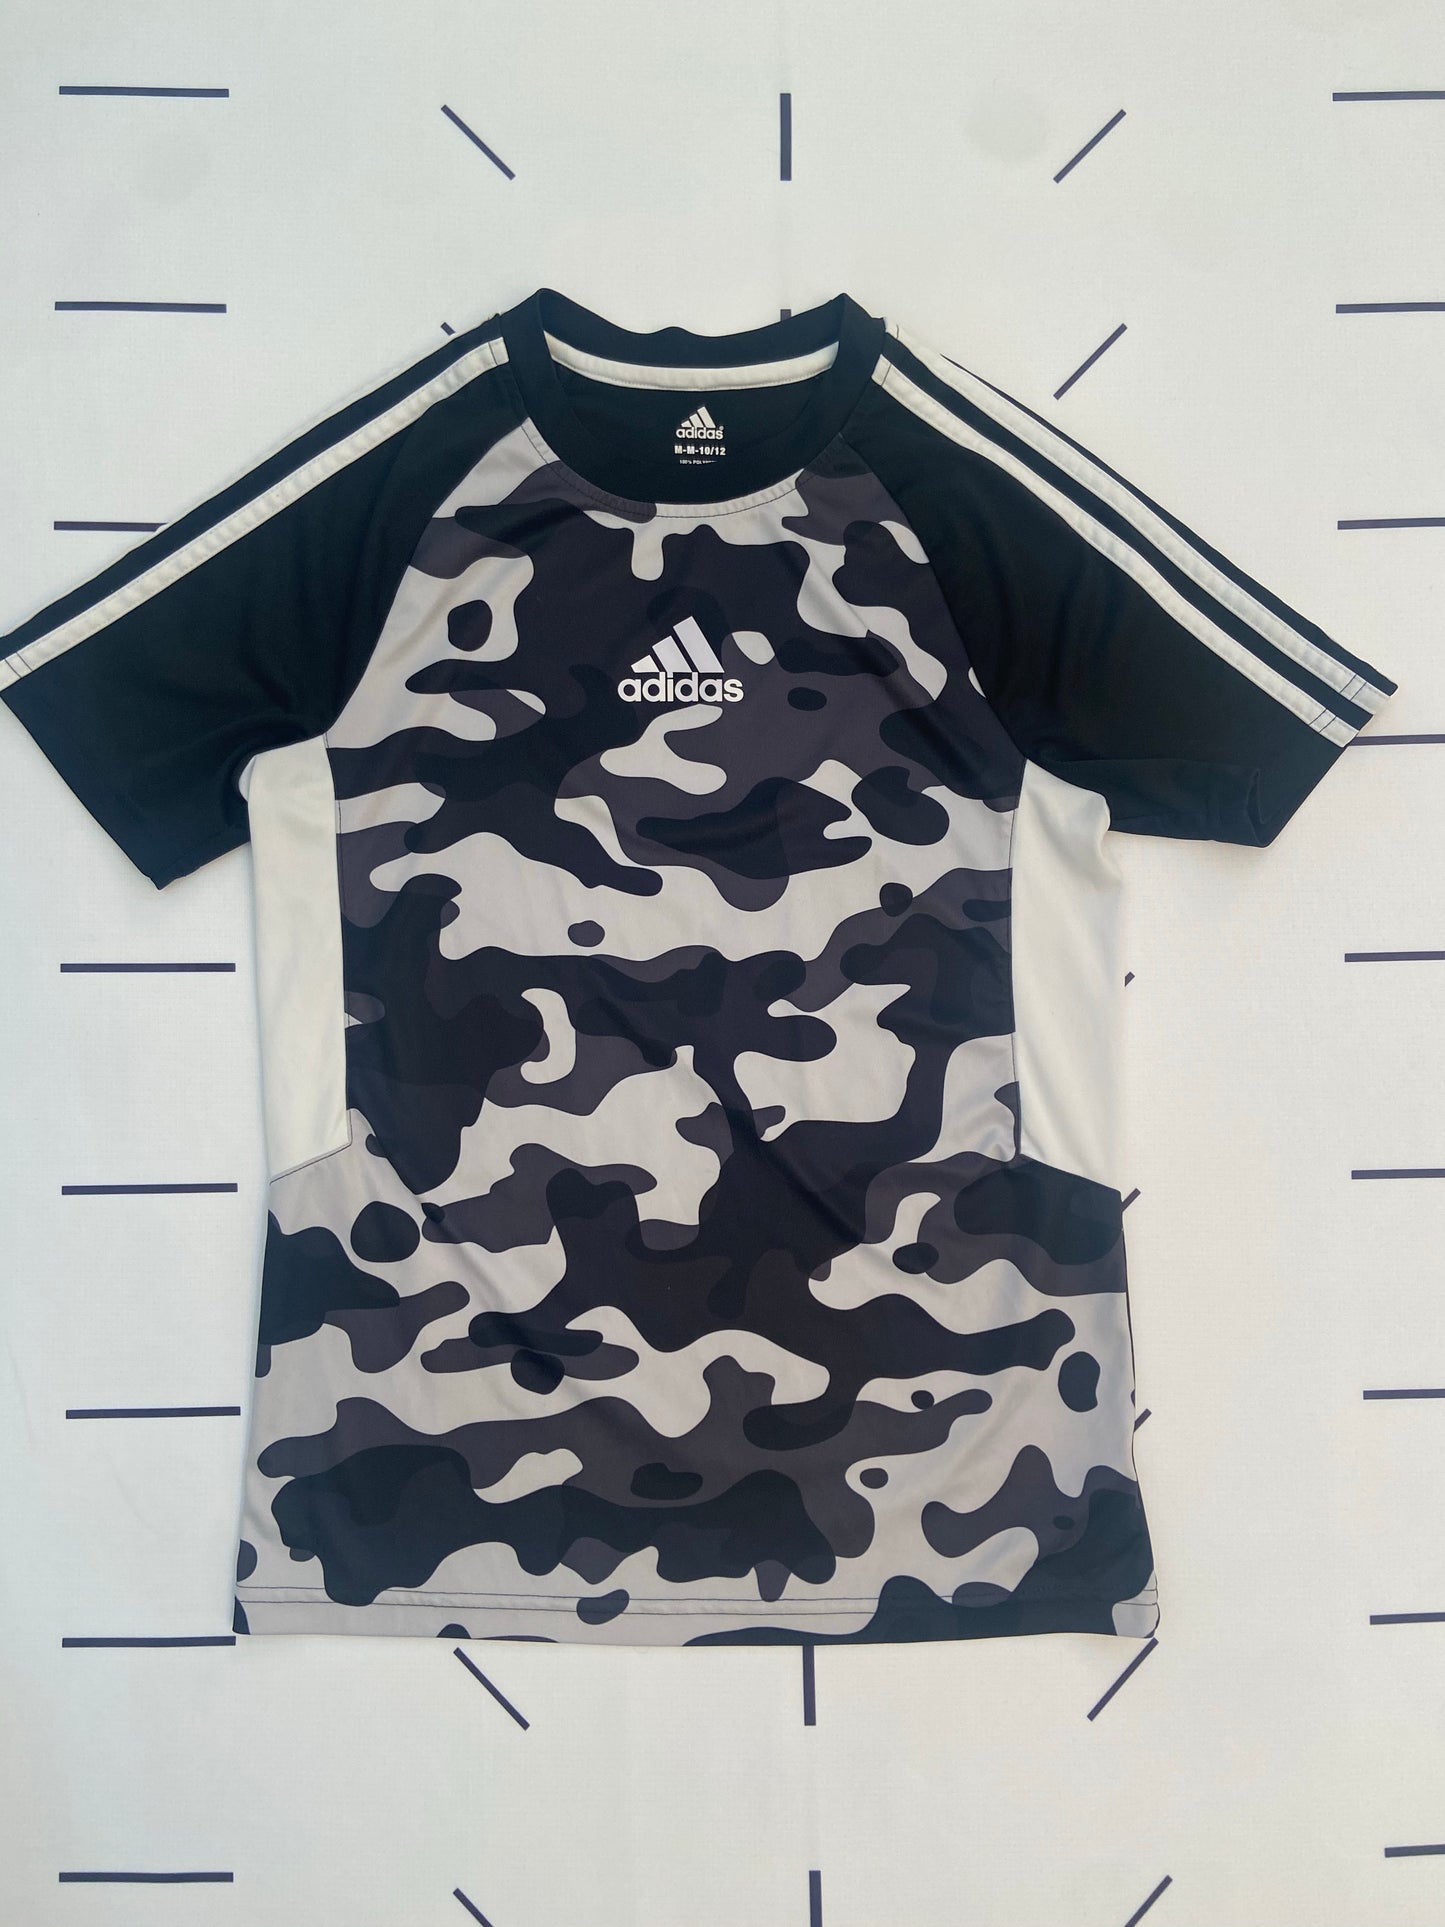 Black and Gray Camo Climalite Tee- Youth M (10-12)